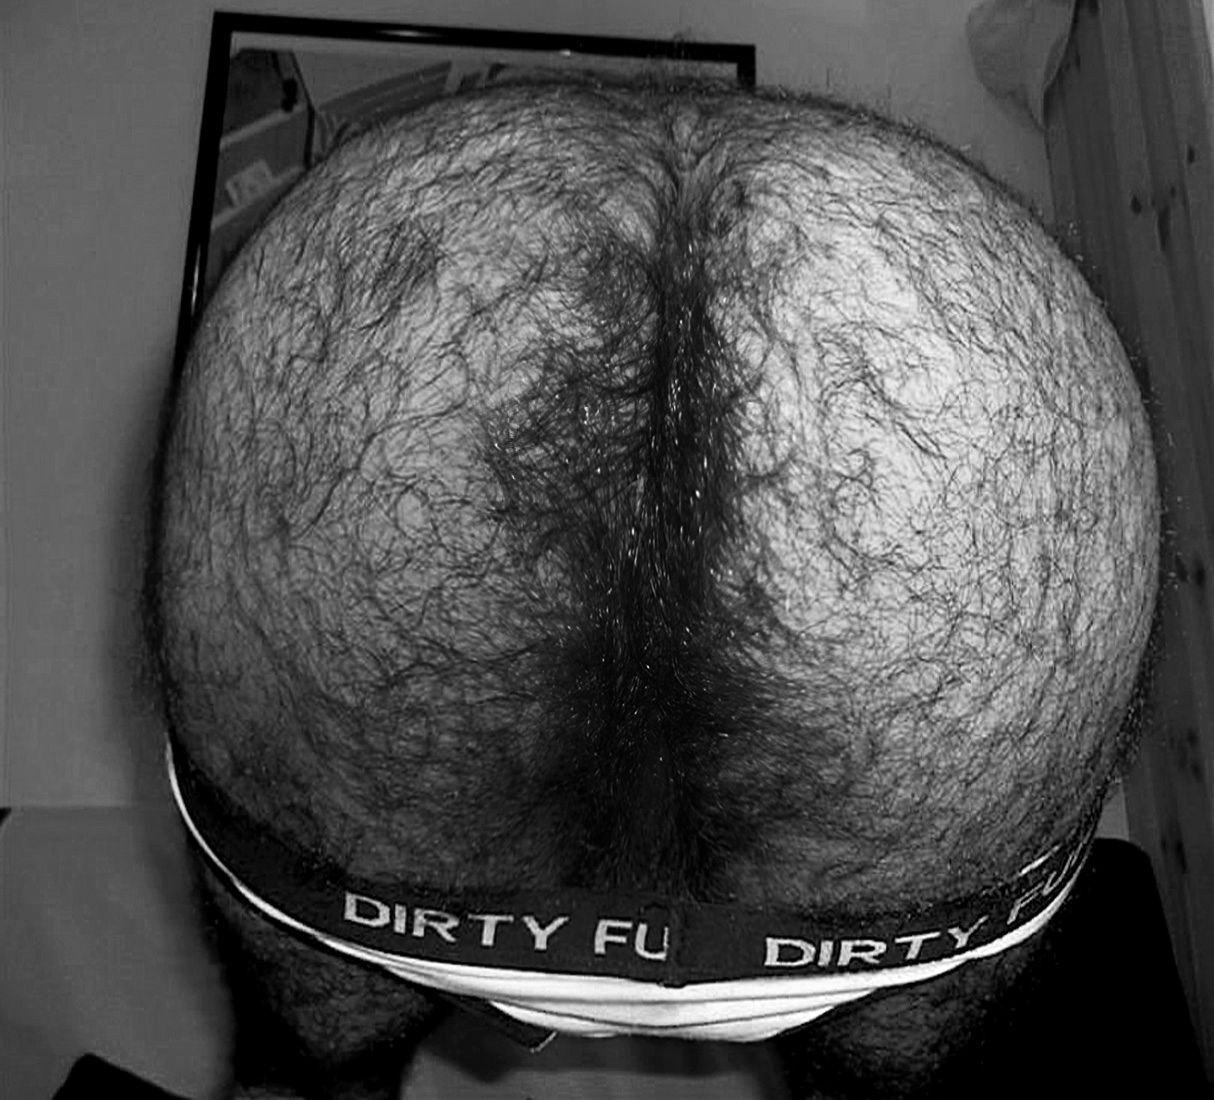 Watch the Photo by Smitty with the username @Resol702, posted on April 8, 2020. The post is about the topic Gay hairy asshole.